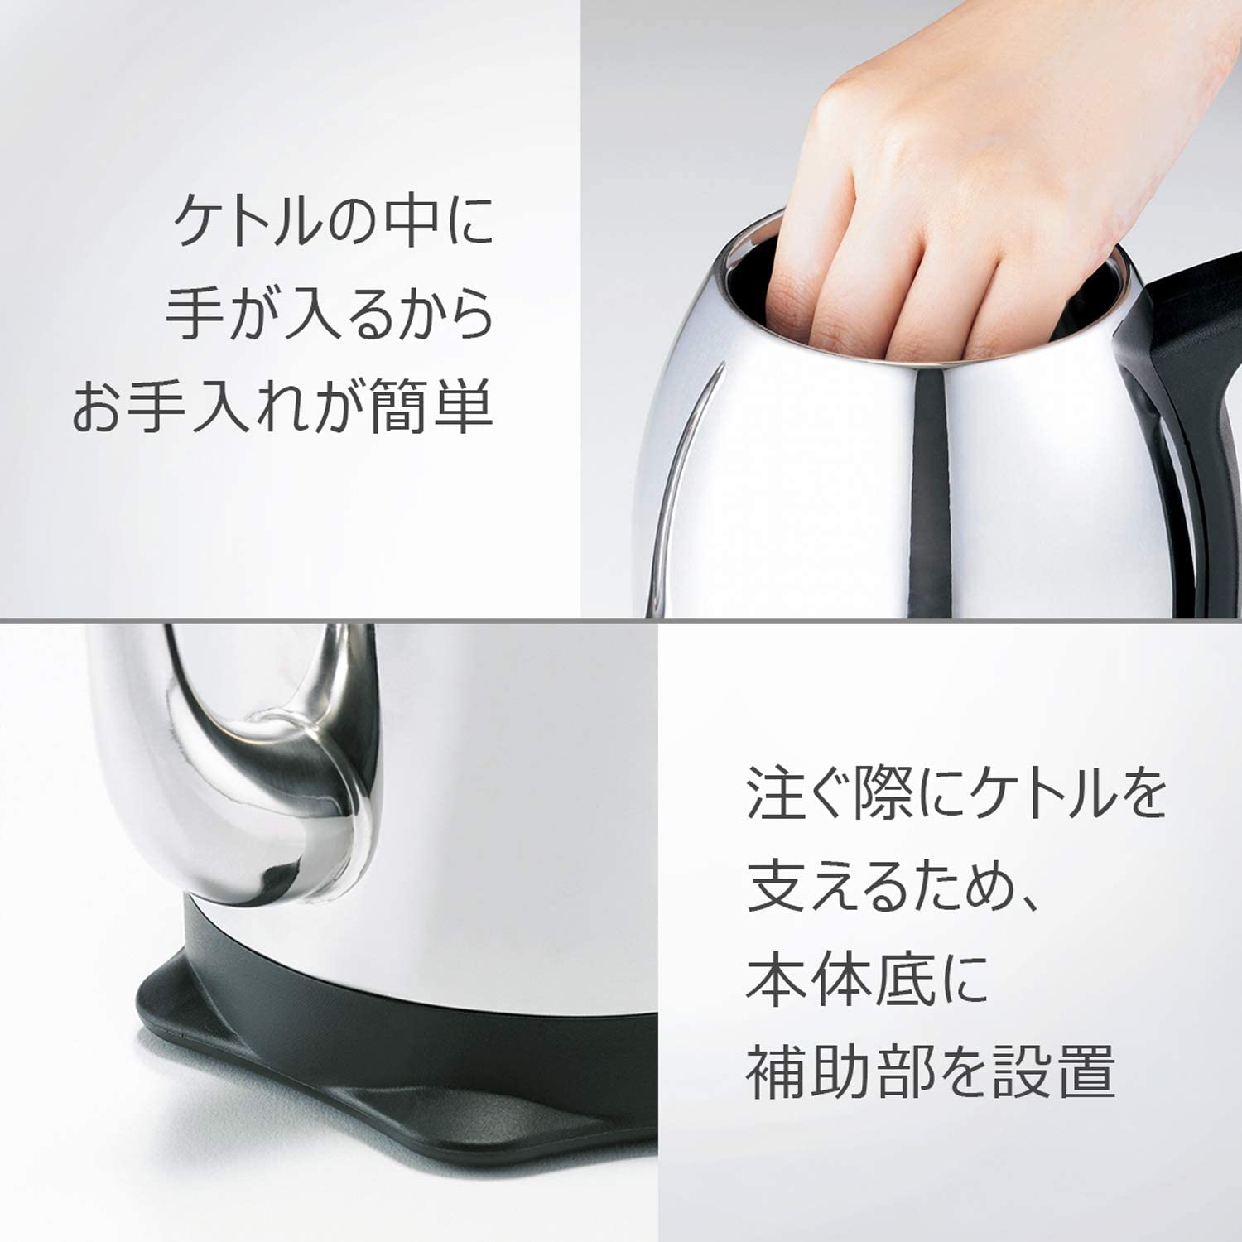 Russell Hobbs(ラッセルホブス) Cafe Kettle 7410JPの商品画像サムネ3 